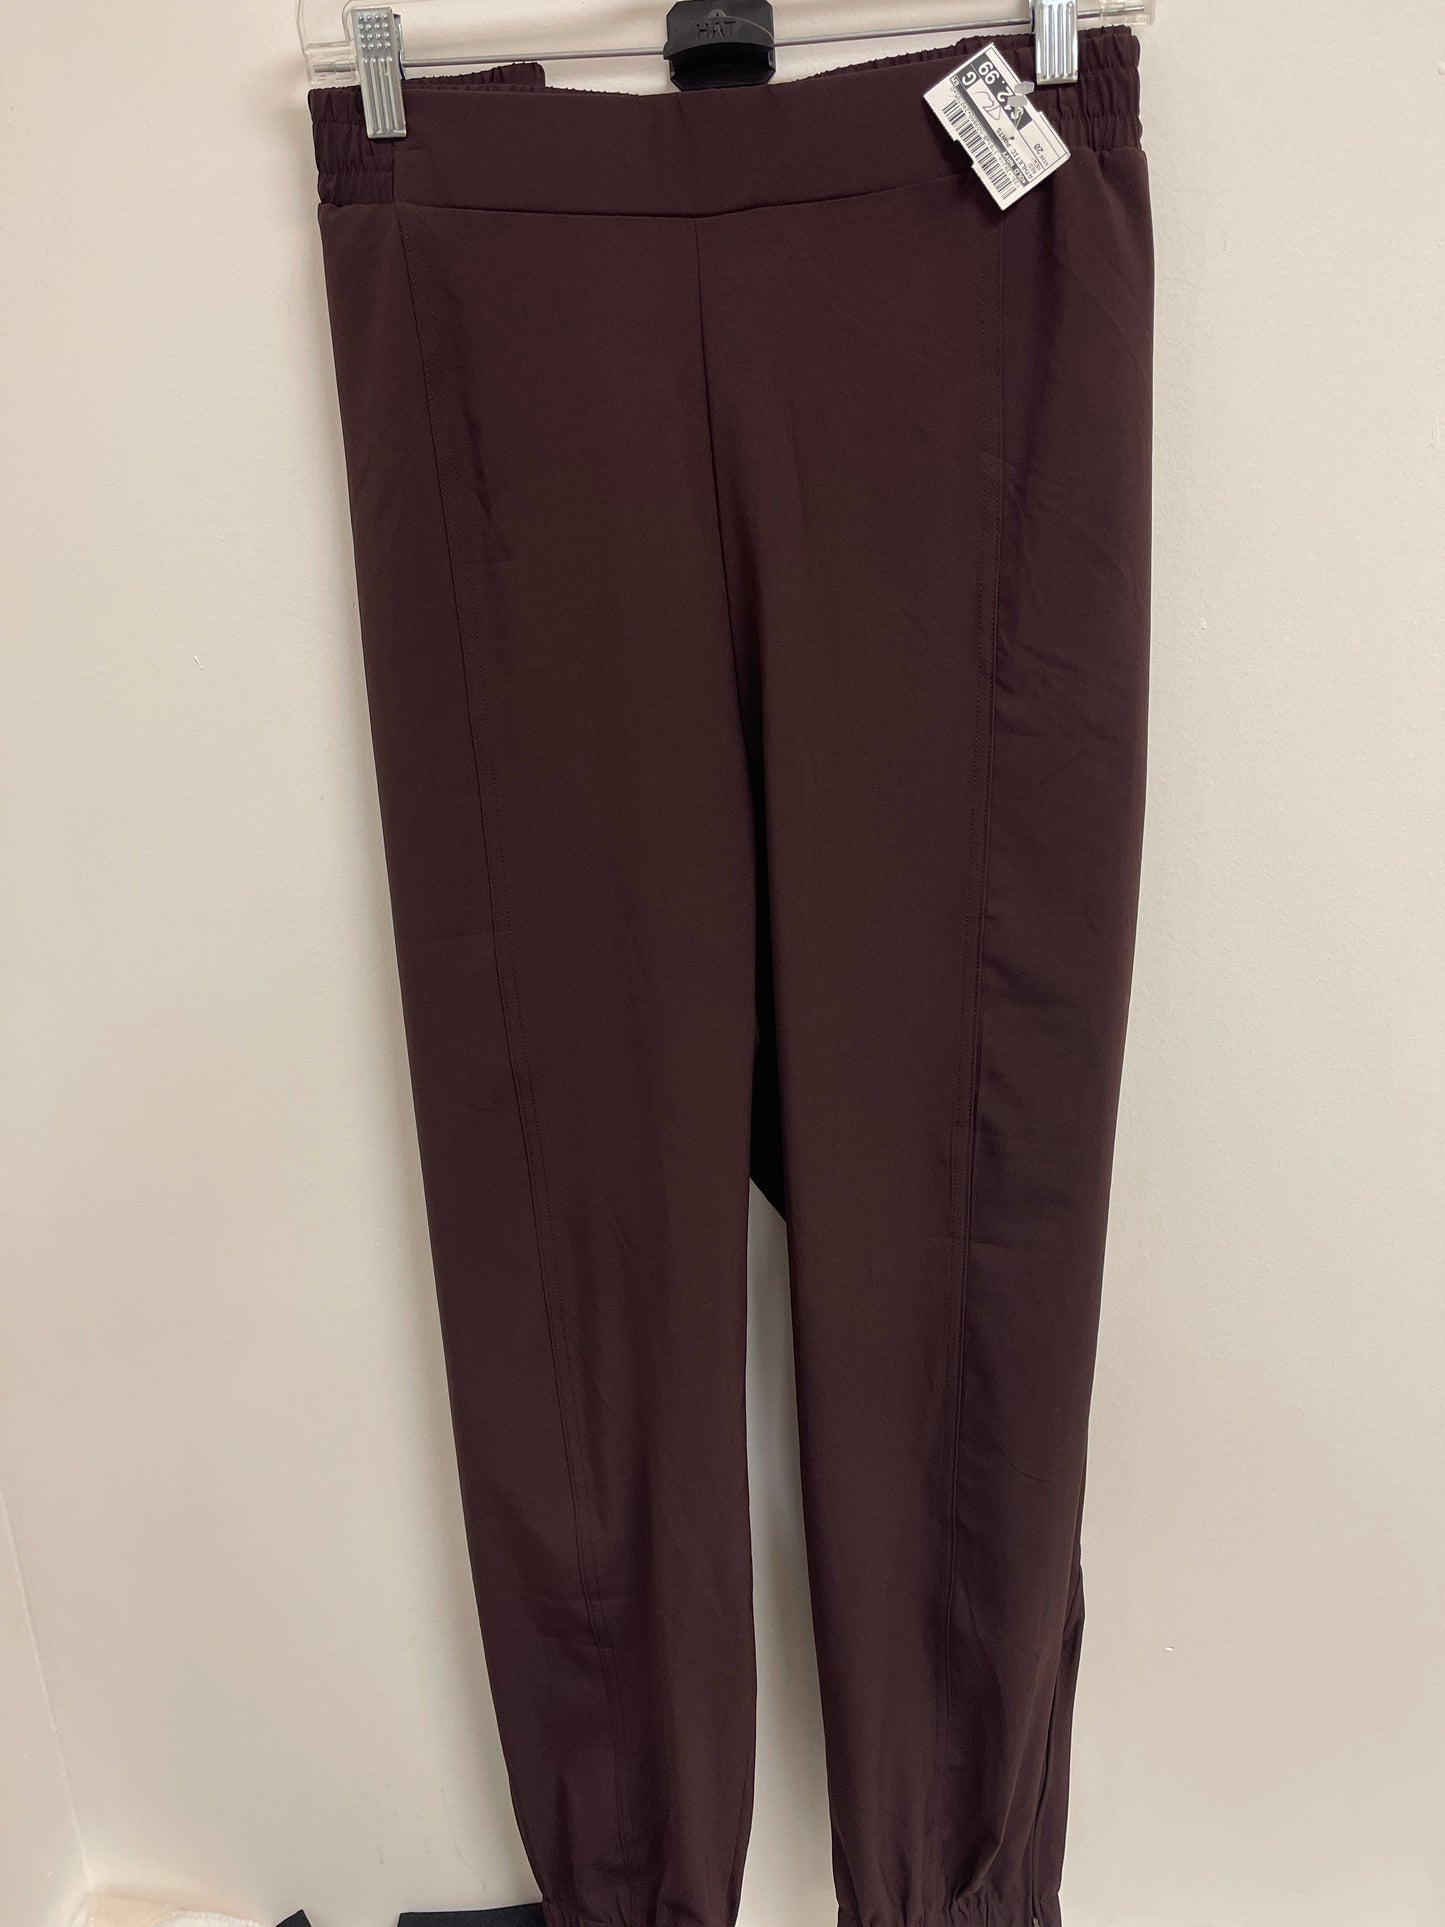 Red Athletic Pants Old Navy, Size 20